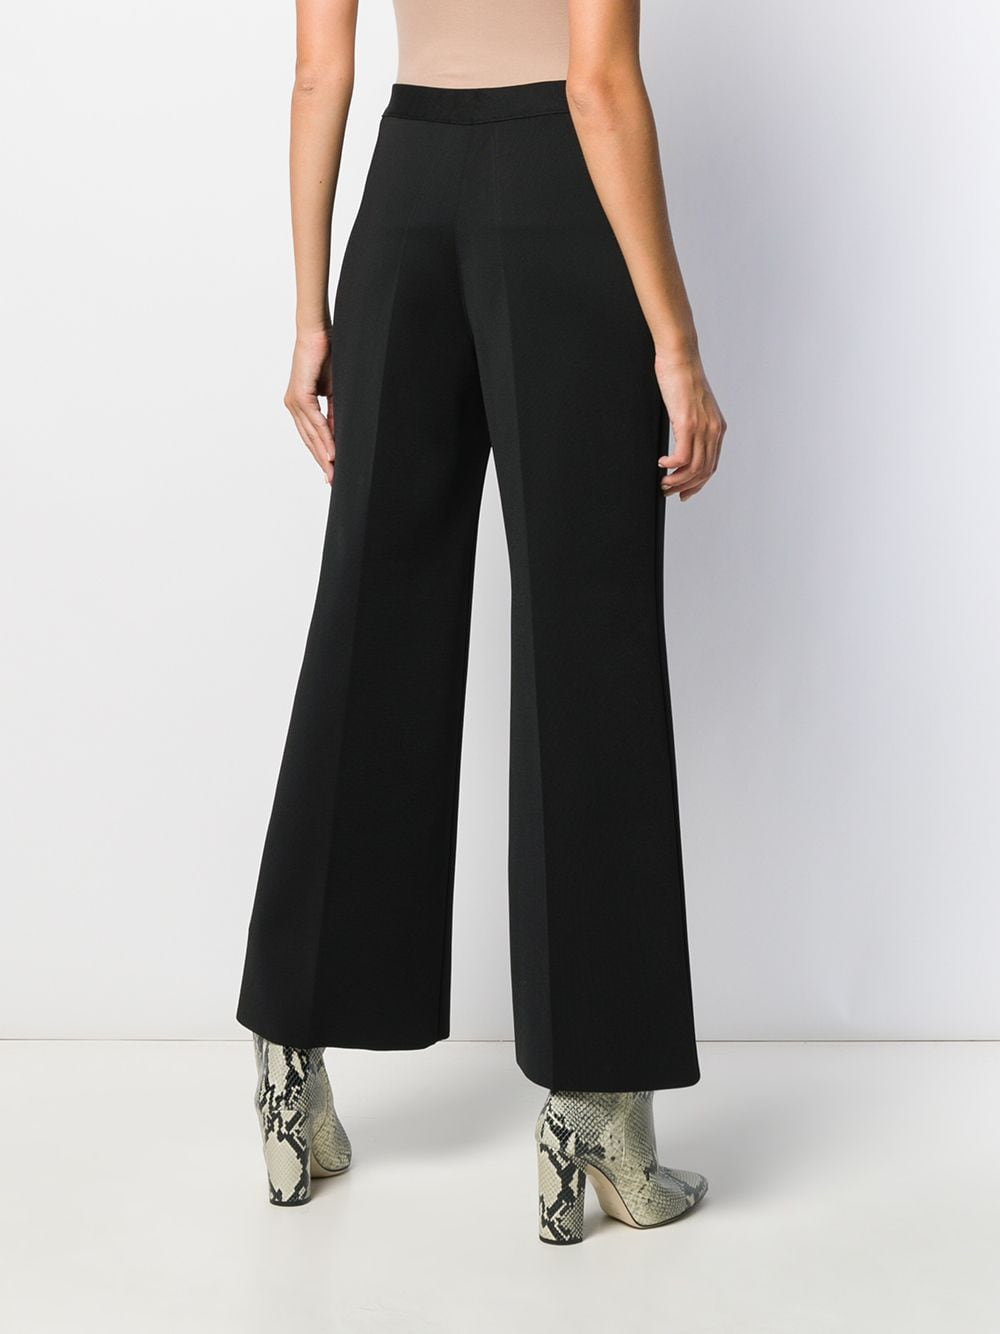 Givenchy Braid Cropped Flared Trousers - Farfetch